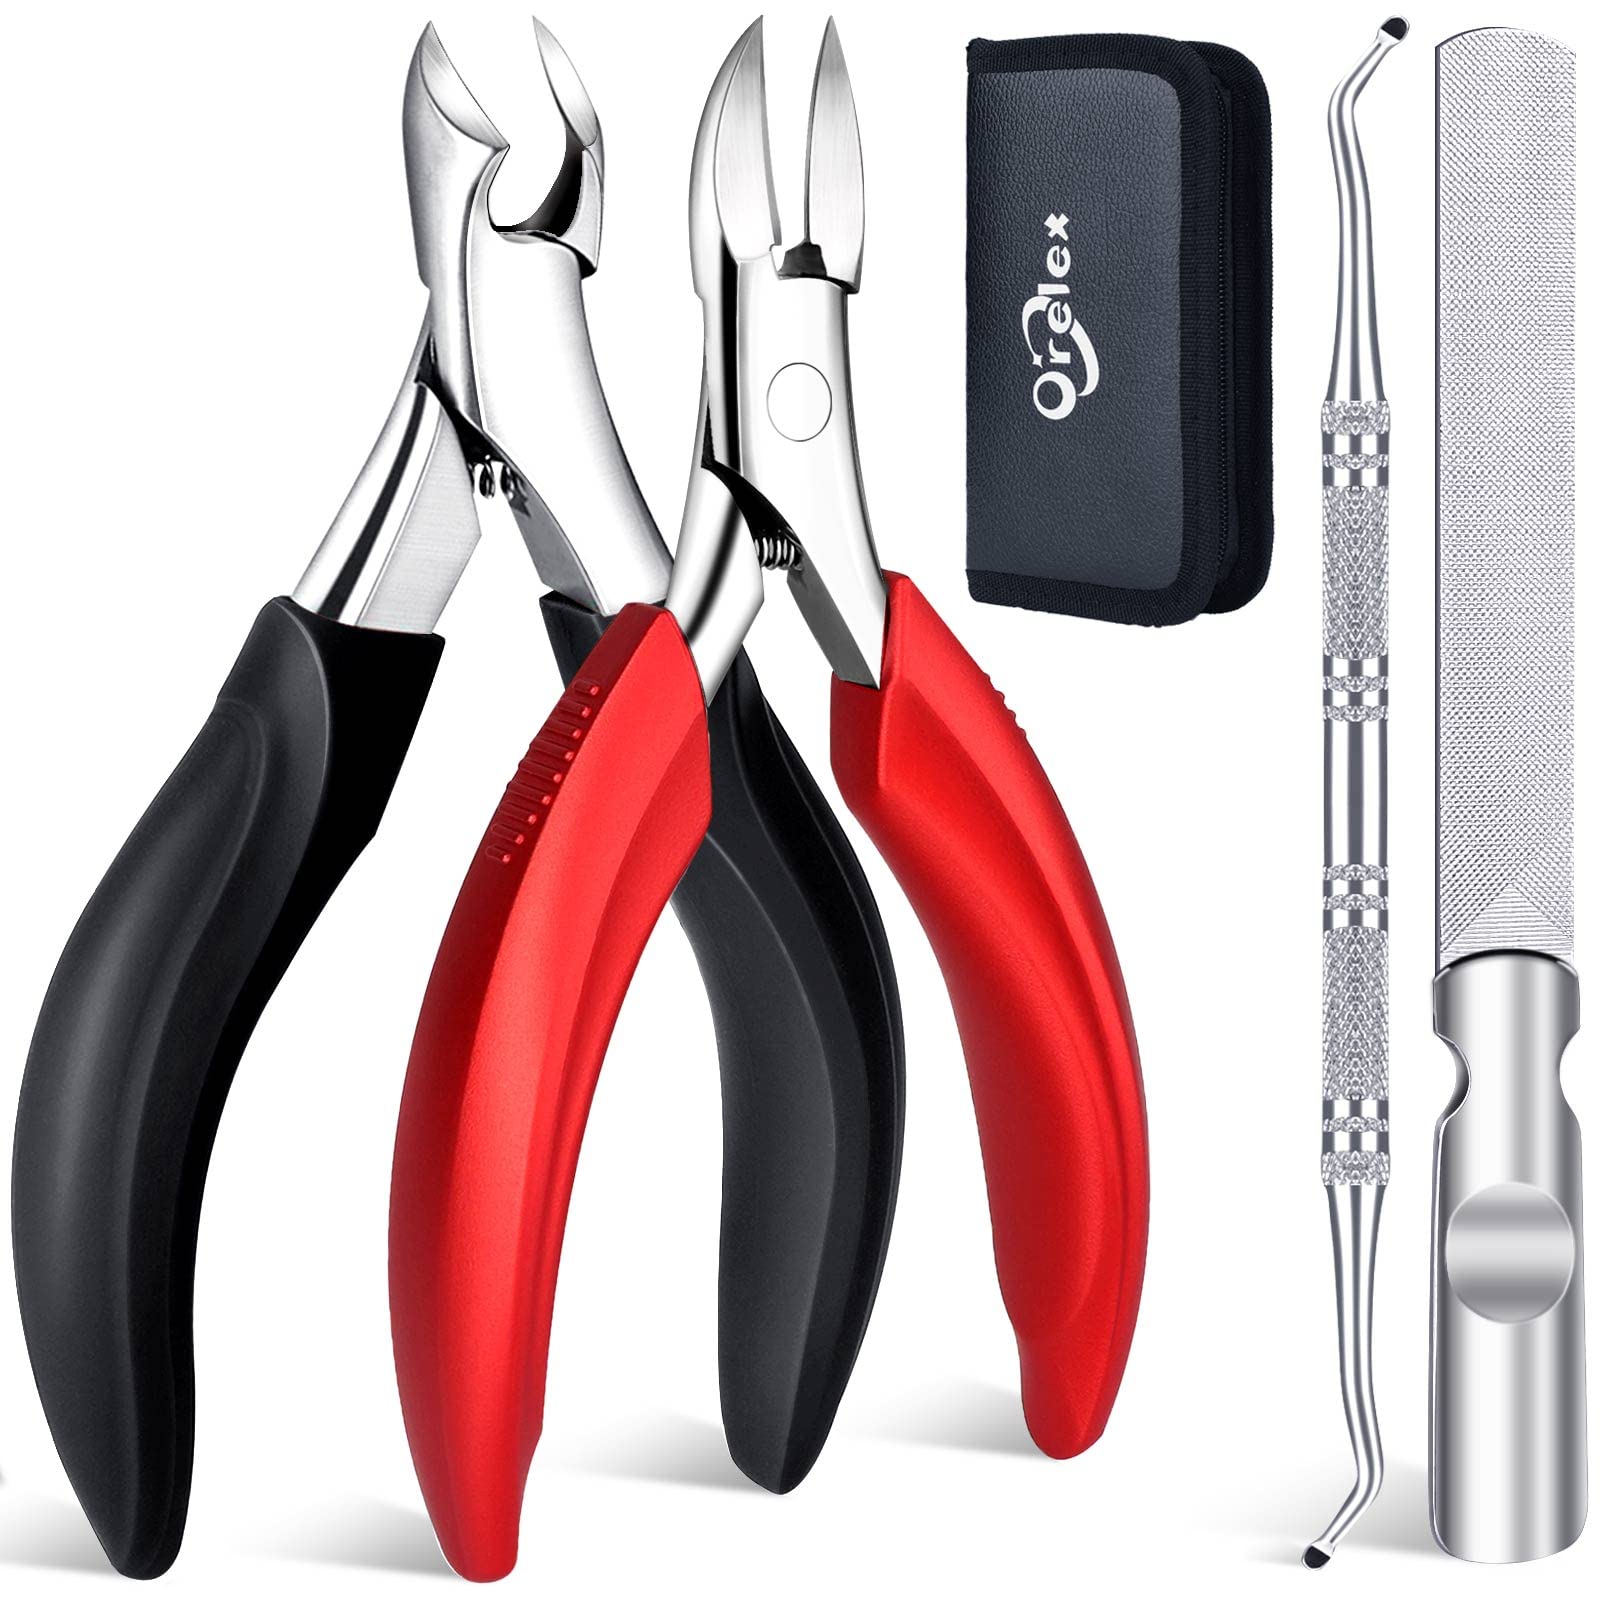 Orelex Toenail Clippers, Toe Nail Clippers for Thick Nails, Have Duty Nail  Clipper Fingernail Clippers for Thick Nails,Seniors, Men, Women, Super